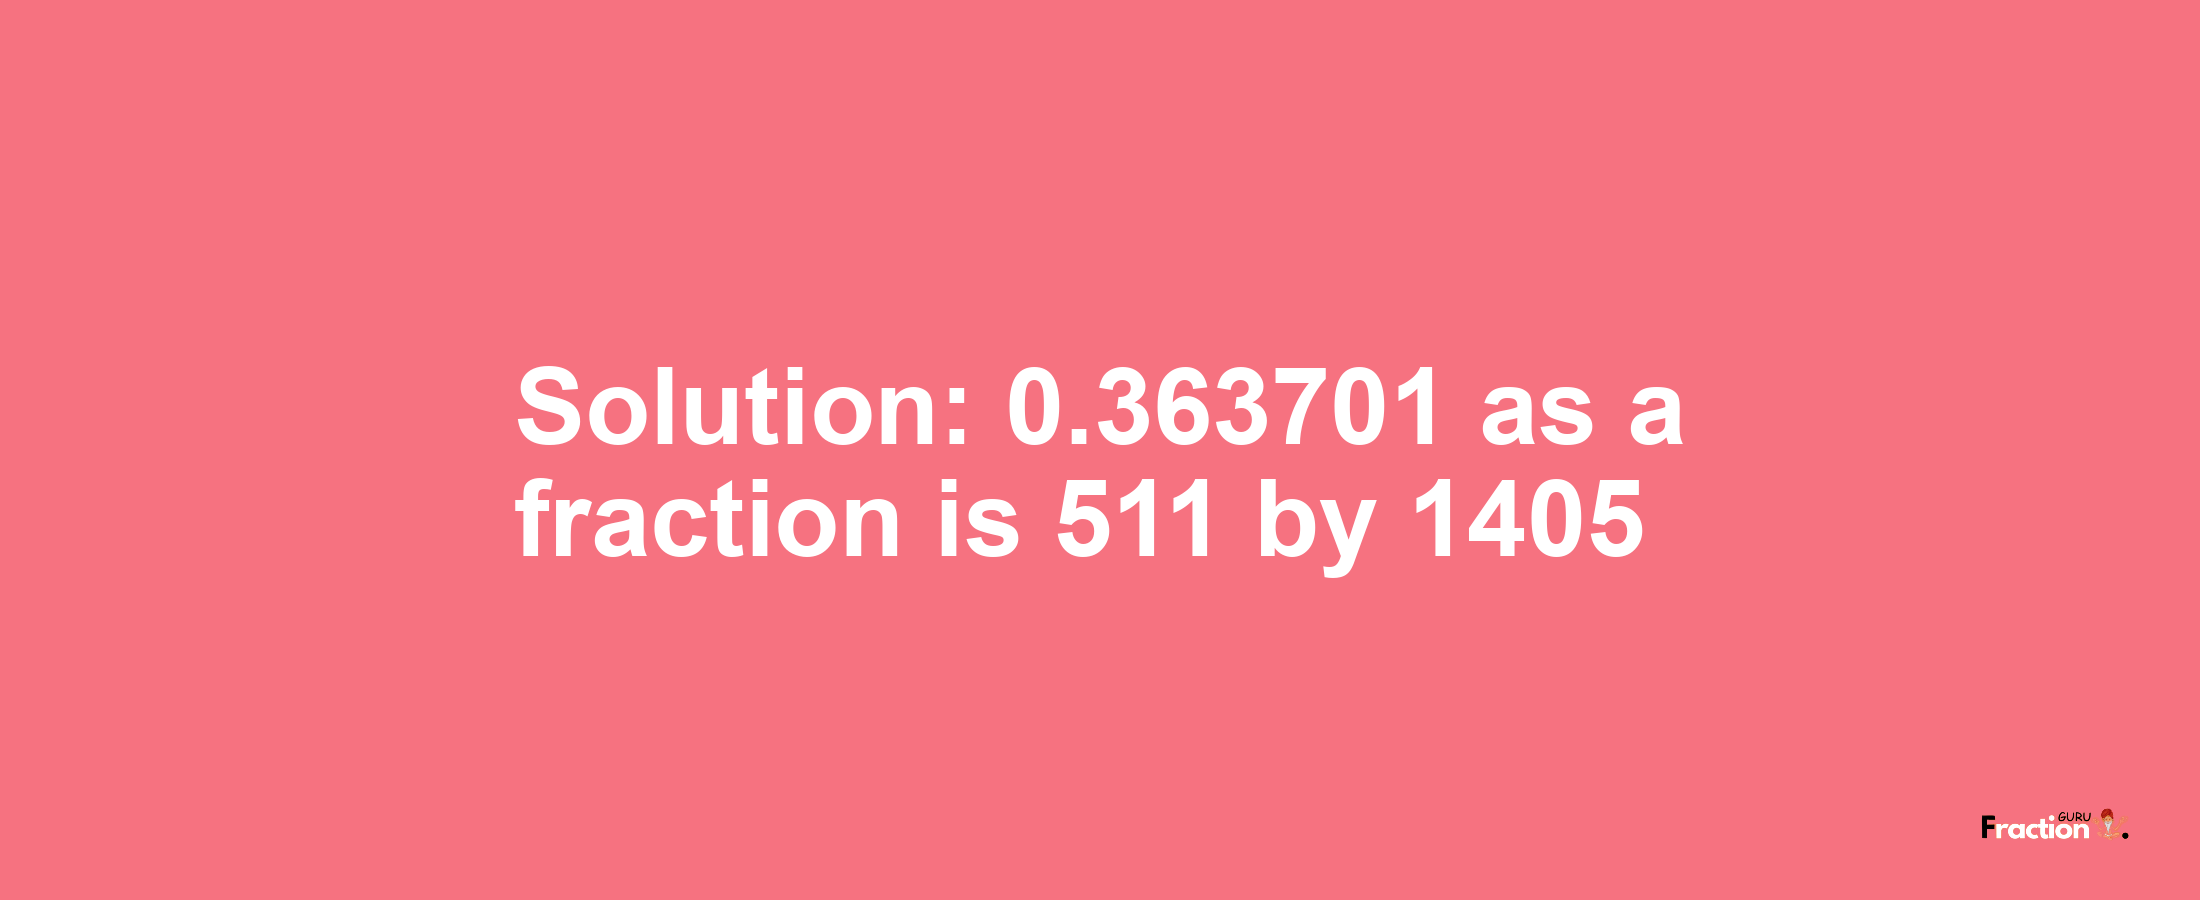 Solution:0.363701 as a fraction is 511/1405